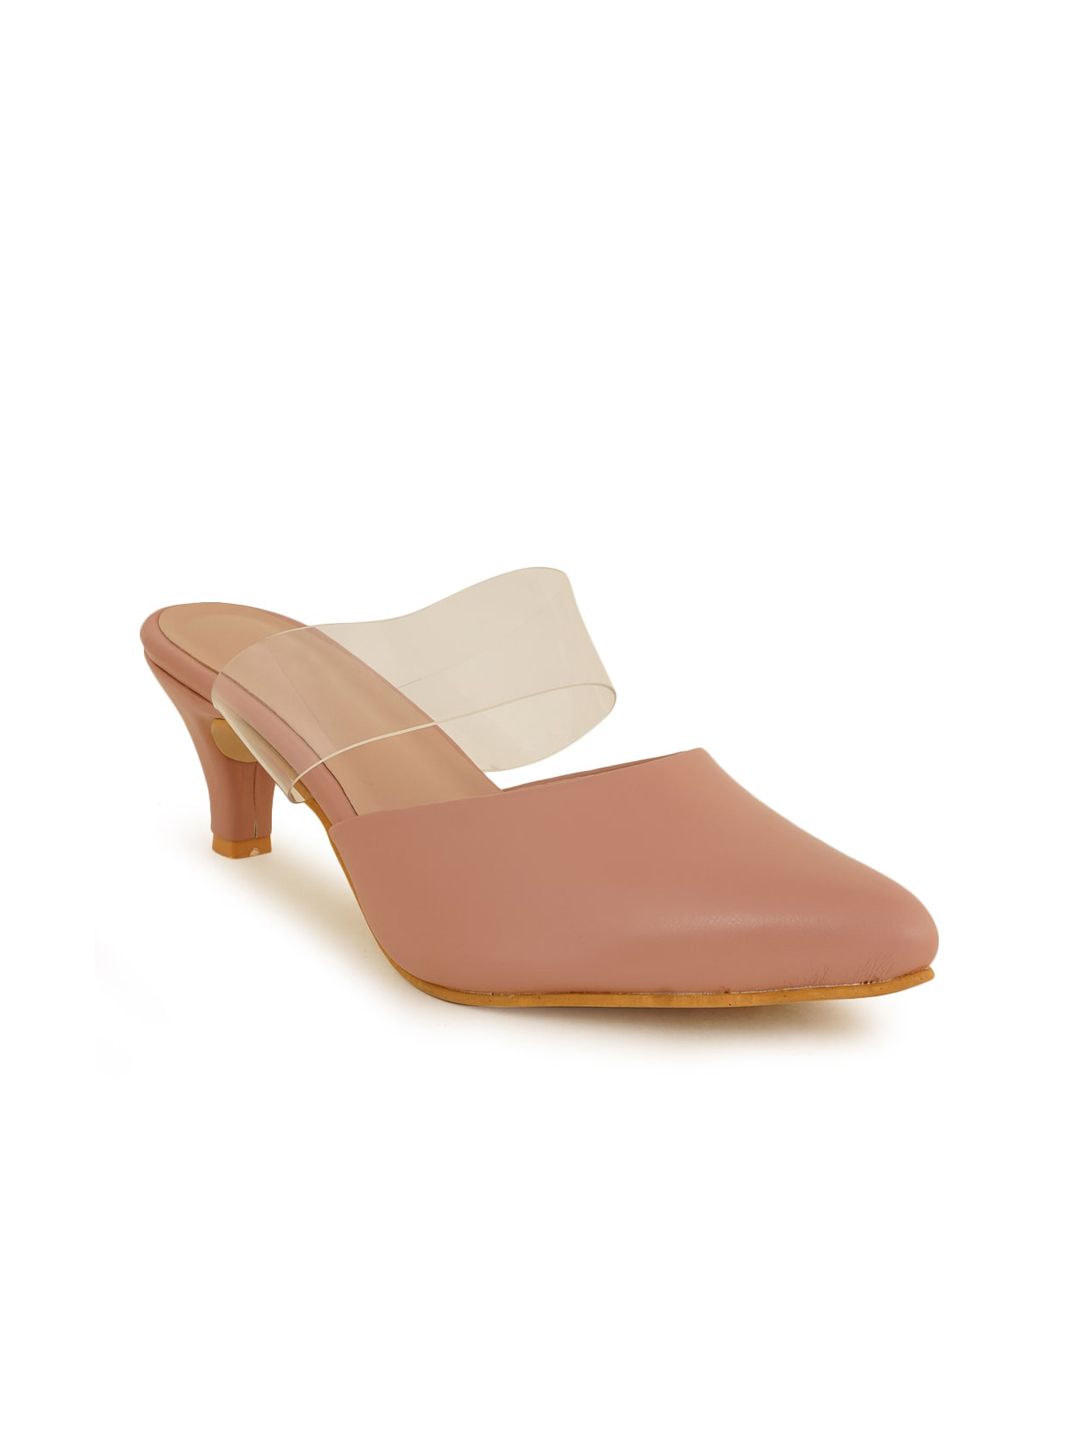 Walkfree Peach-Coloured Solid Kitten Pumps Price in India